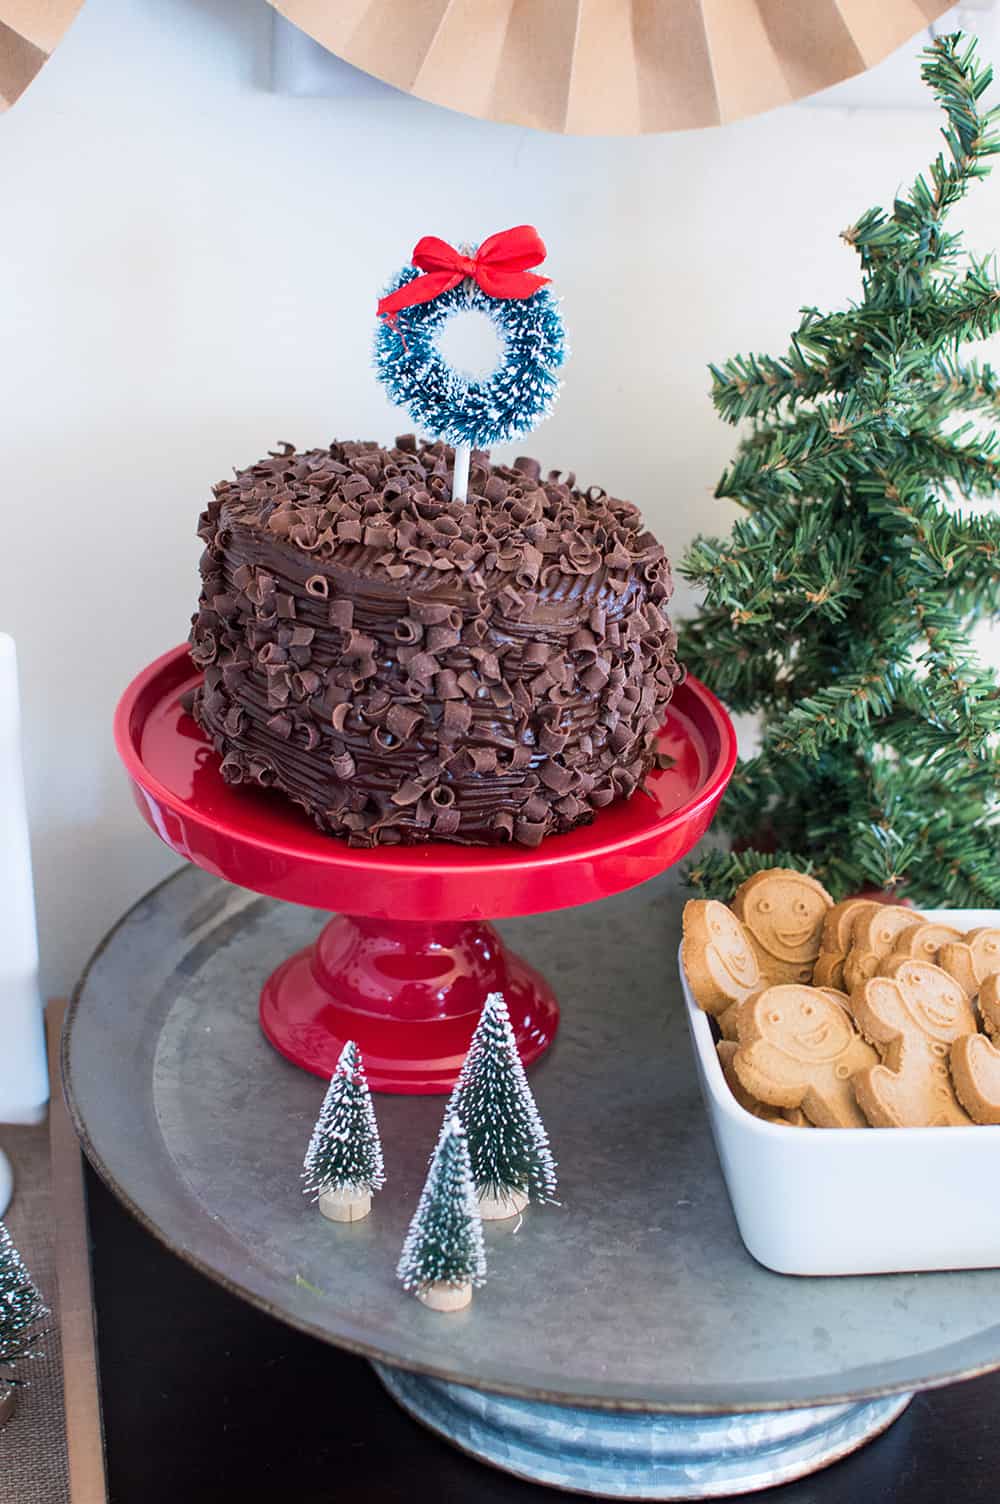 Cake and Cookies at a Holiday Hot Cocoa Bar Styled by Elva M Design Studio